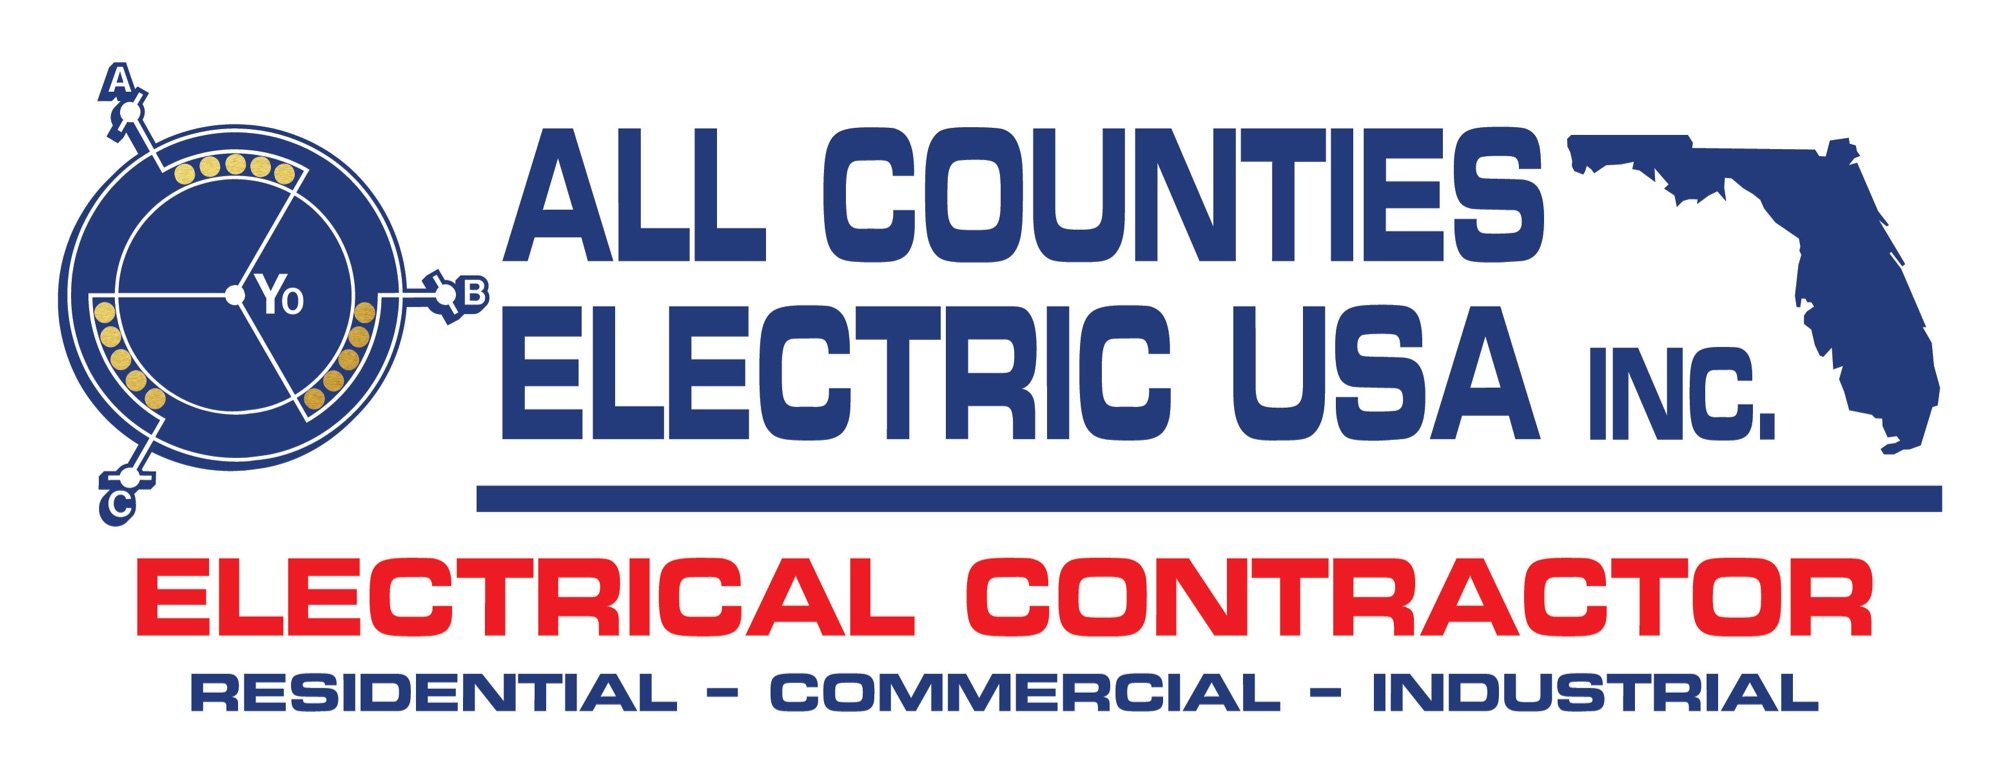 All Counties Electric USA, Inc. Logo